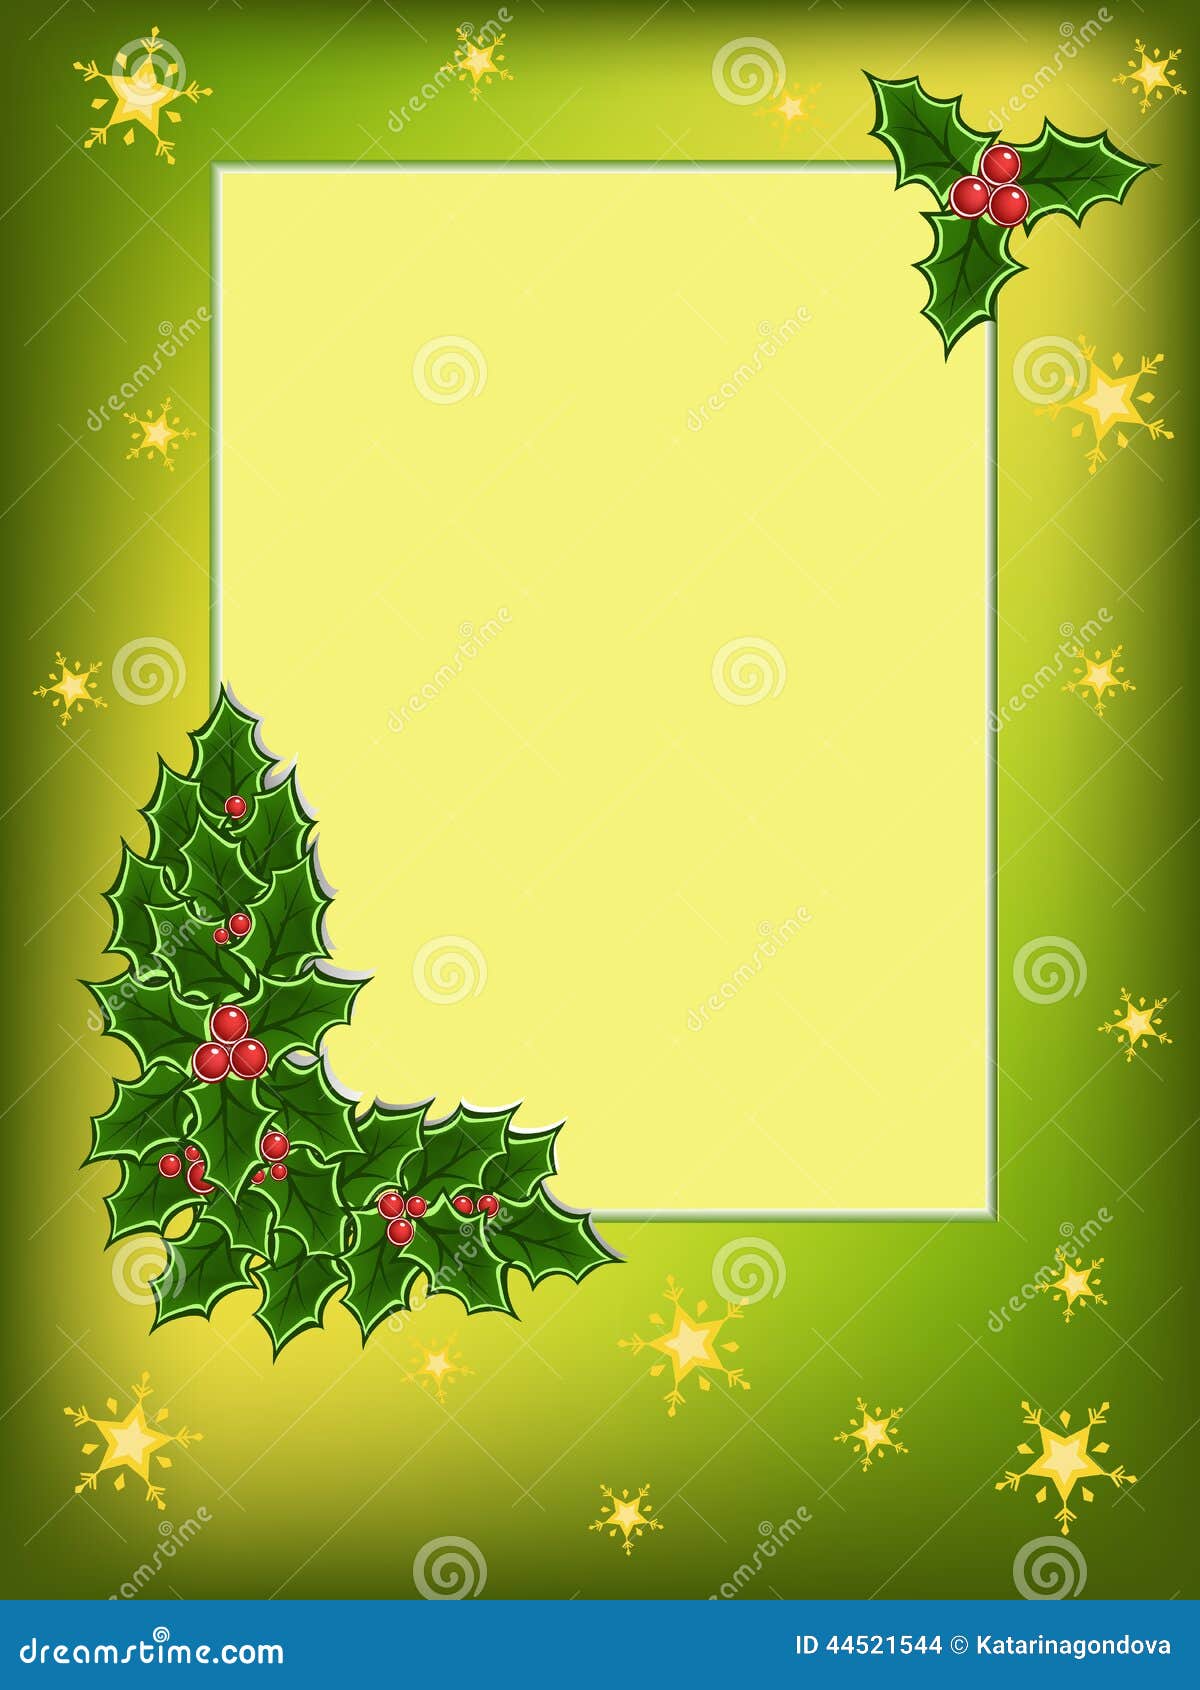 Christmas Card Background with Holly Stock Vector - Illustration ...